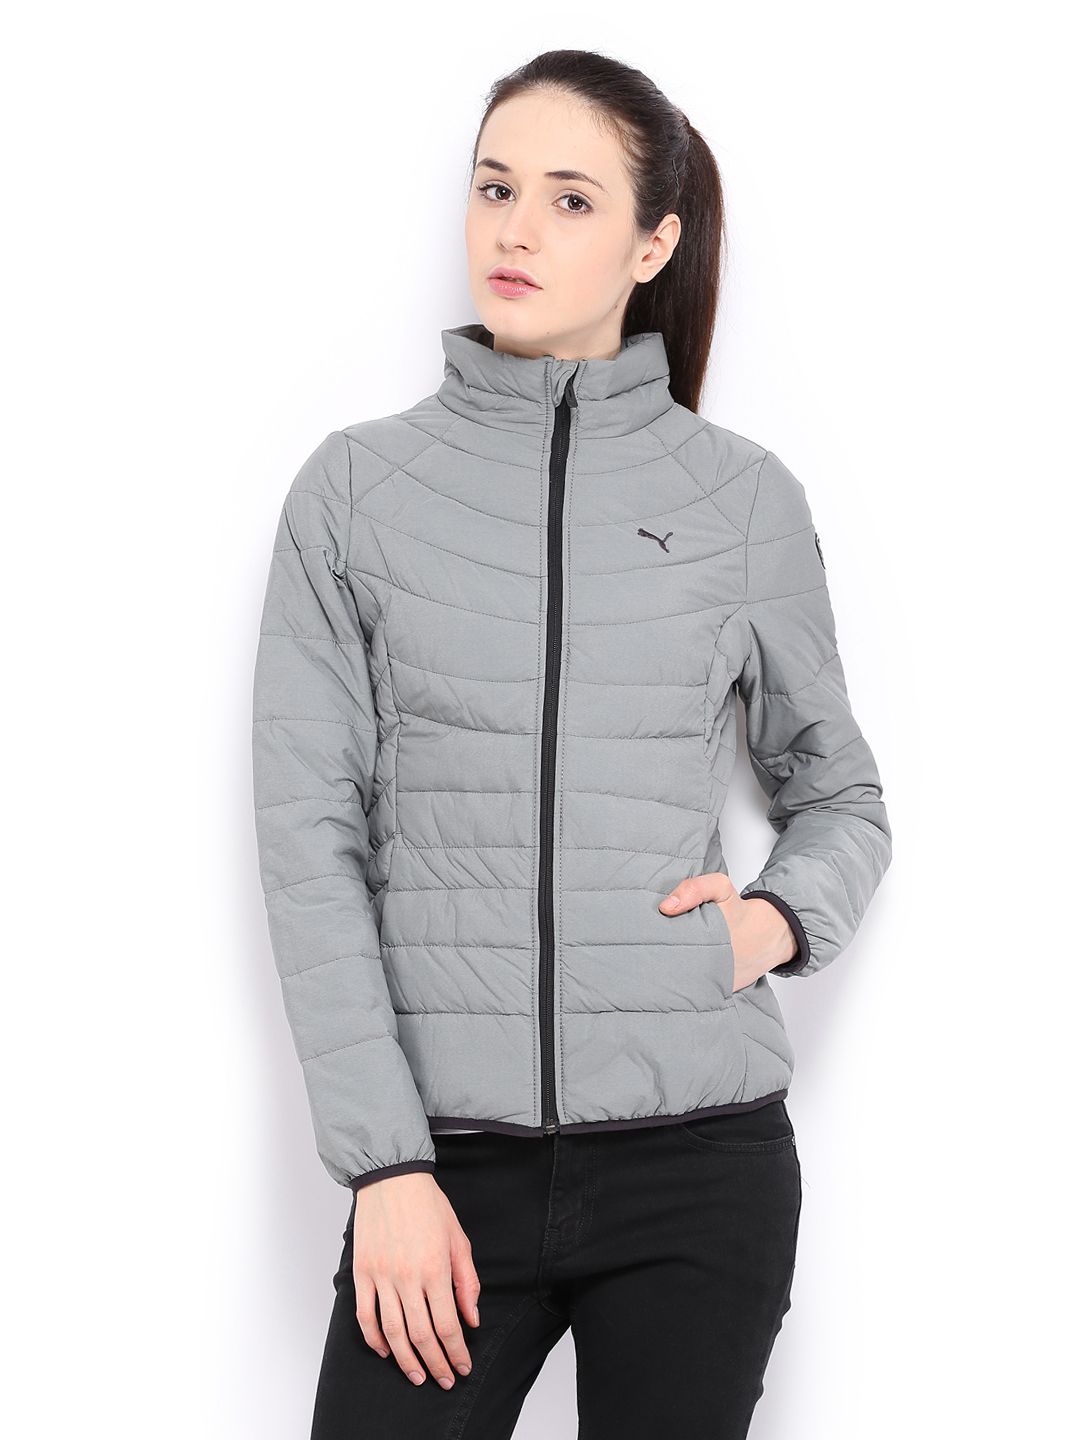 puma jackets price in india